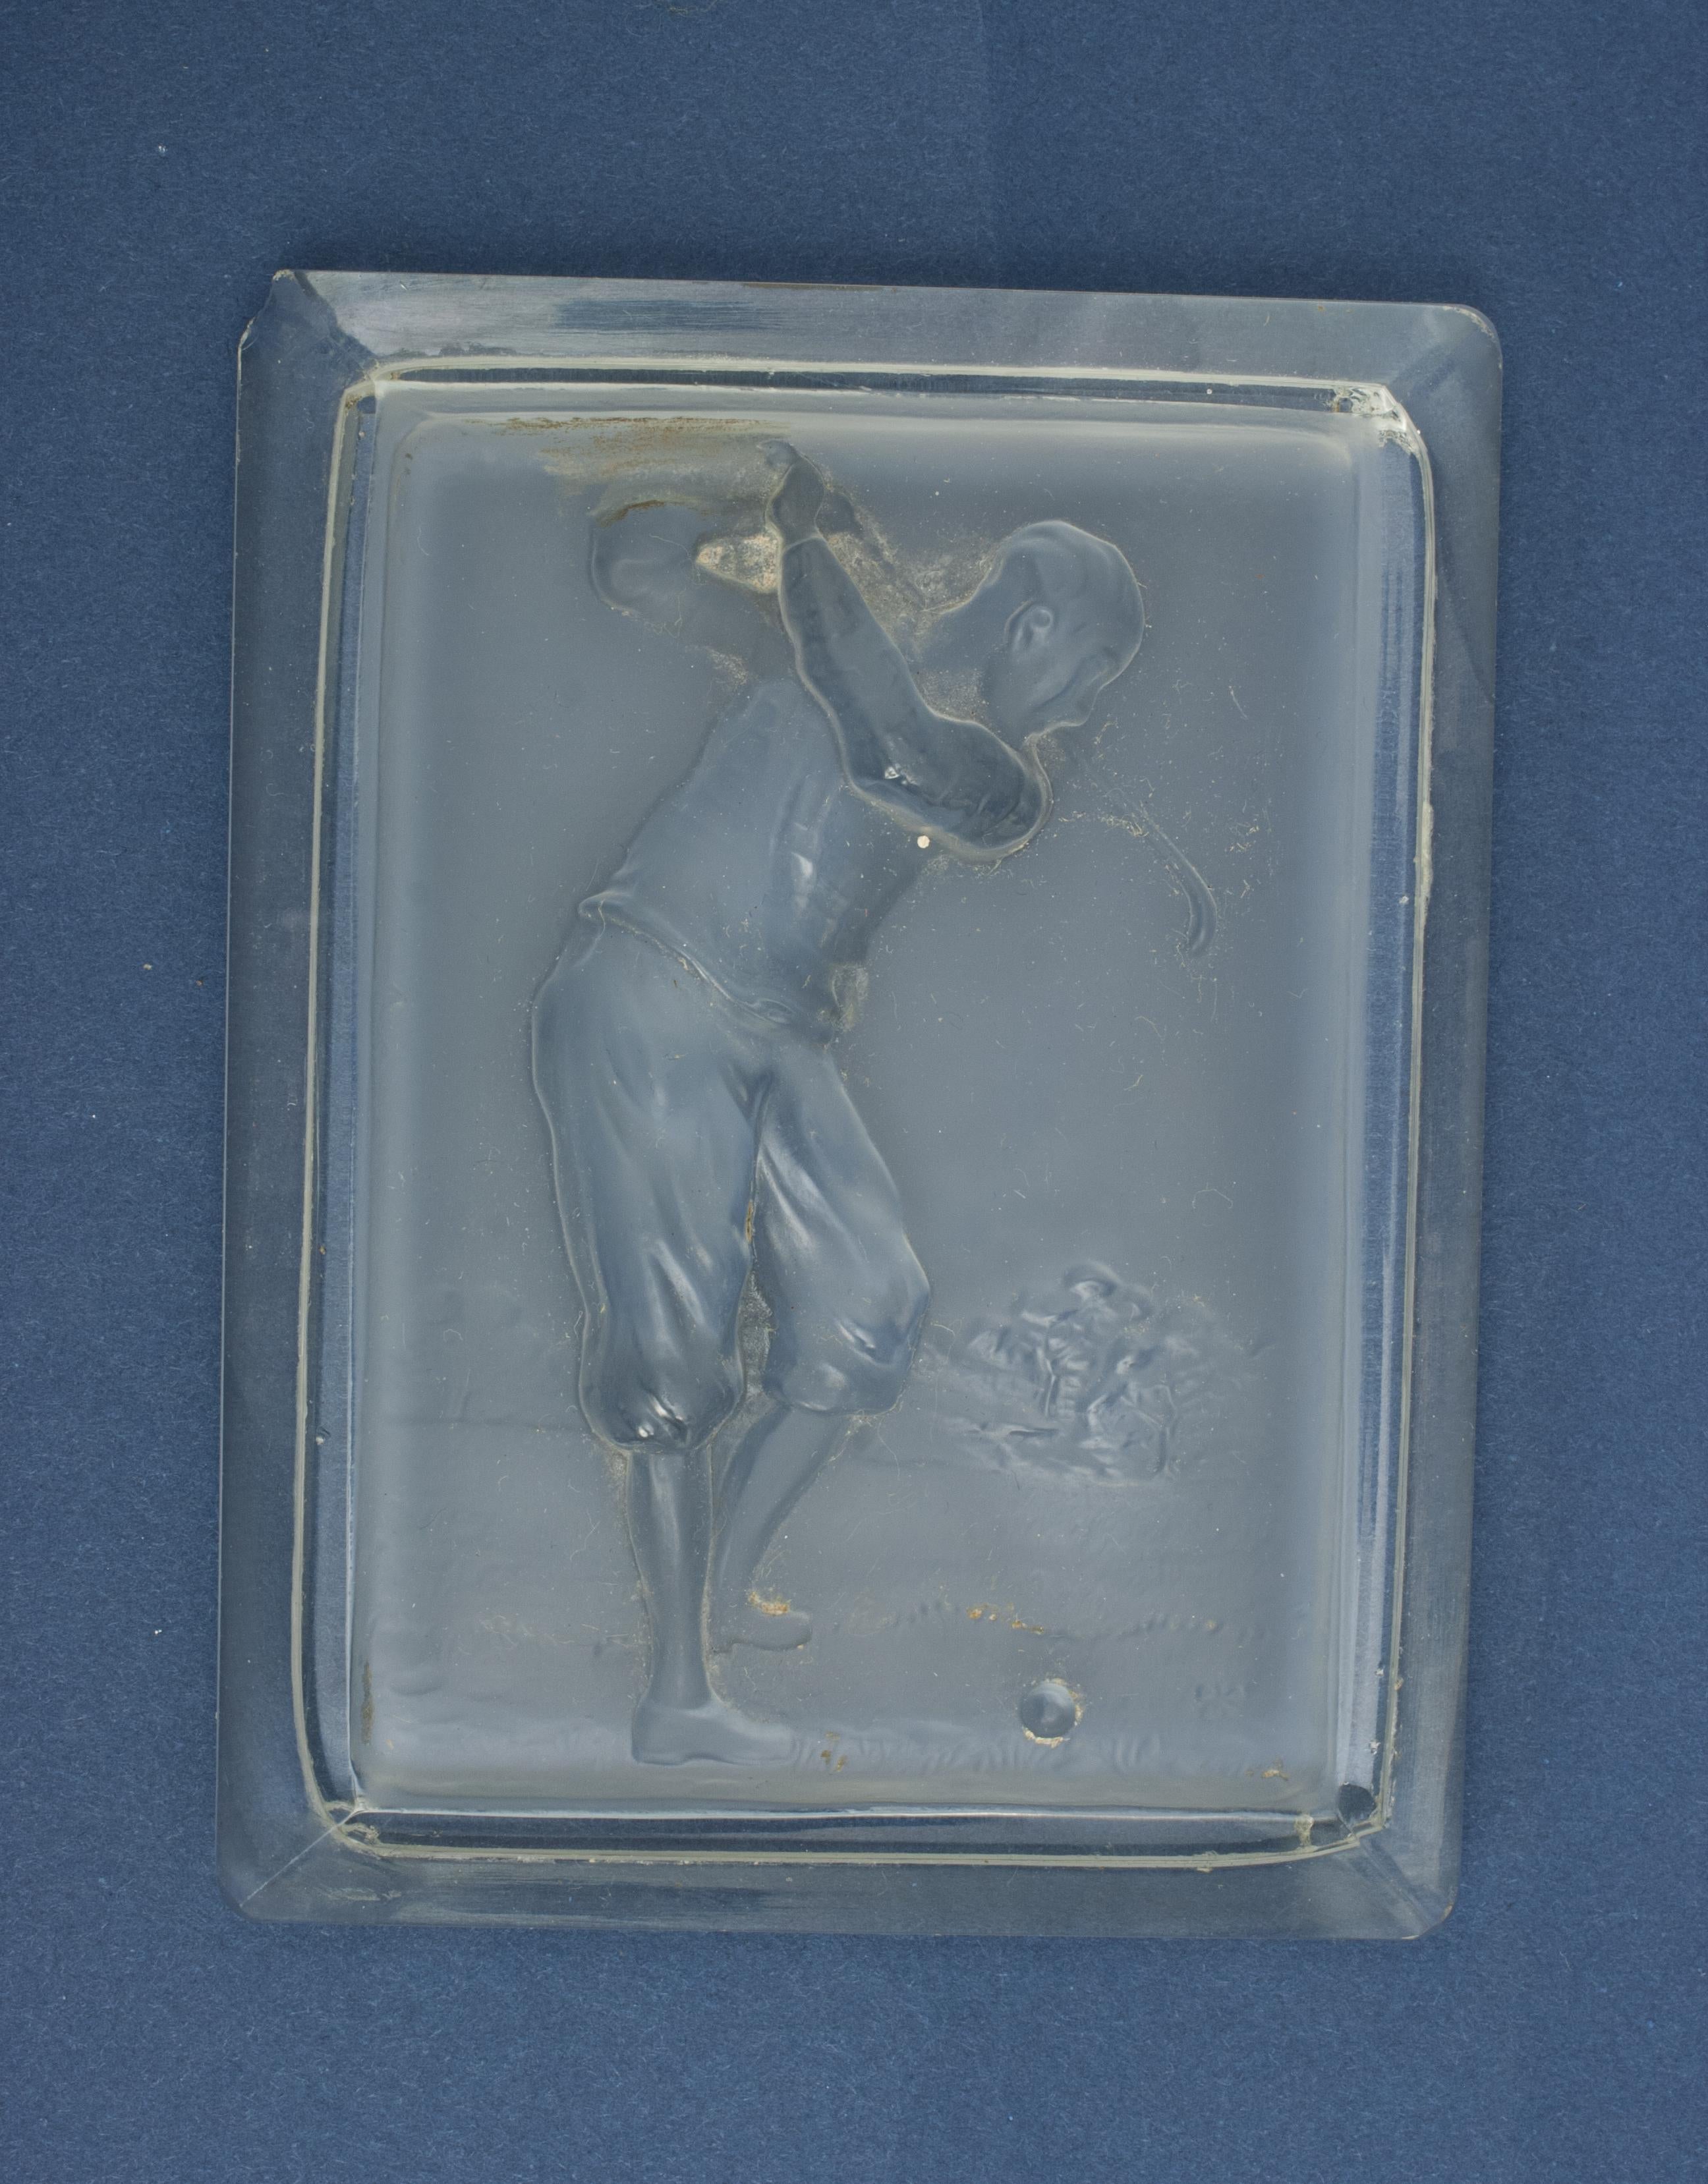 Vintage glass golf box & cover.
An Art Deco glass Jewelry box, dish, of rectangular form with lid. The pressed lid moulded with relief golfer in full backswing. We have had a 'Golf Baccarat Glass Pin Tray' with the same image on it, unfortunately